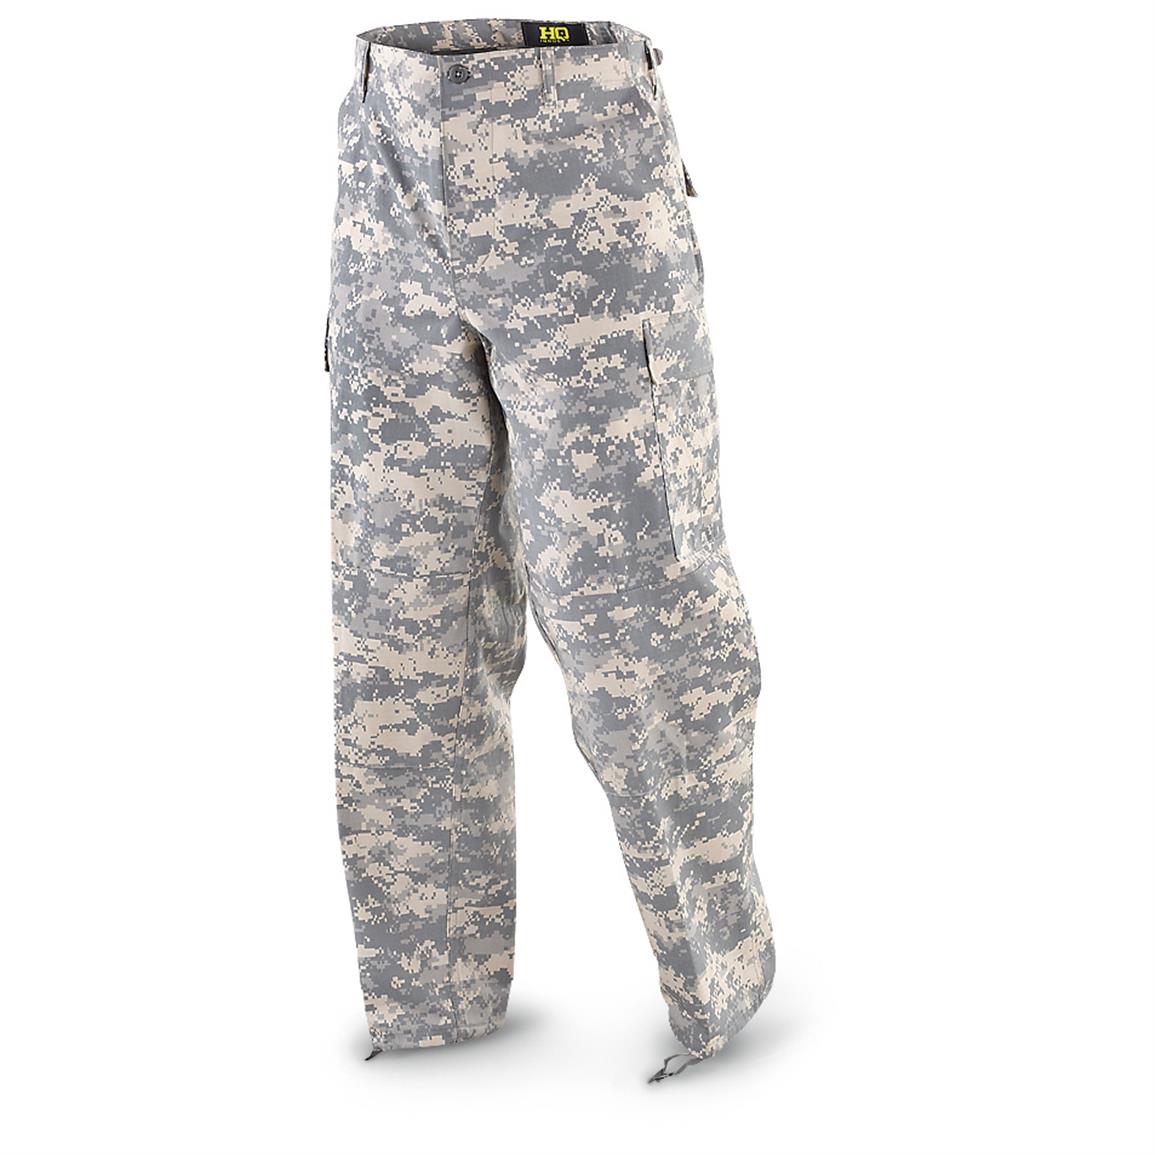 HQ ISSUE Military-style BDU Cotton Ripstop Pants - 592360, Tactical ...